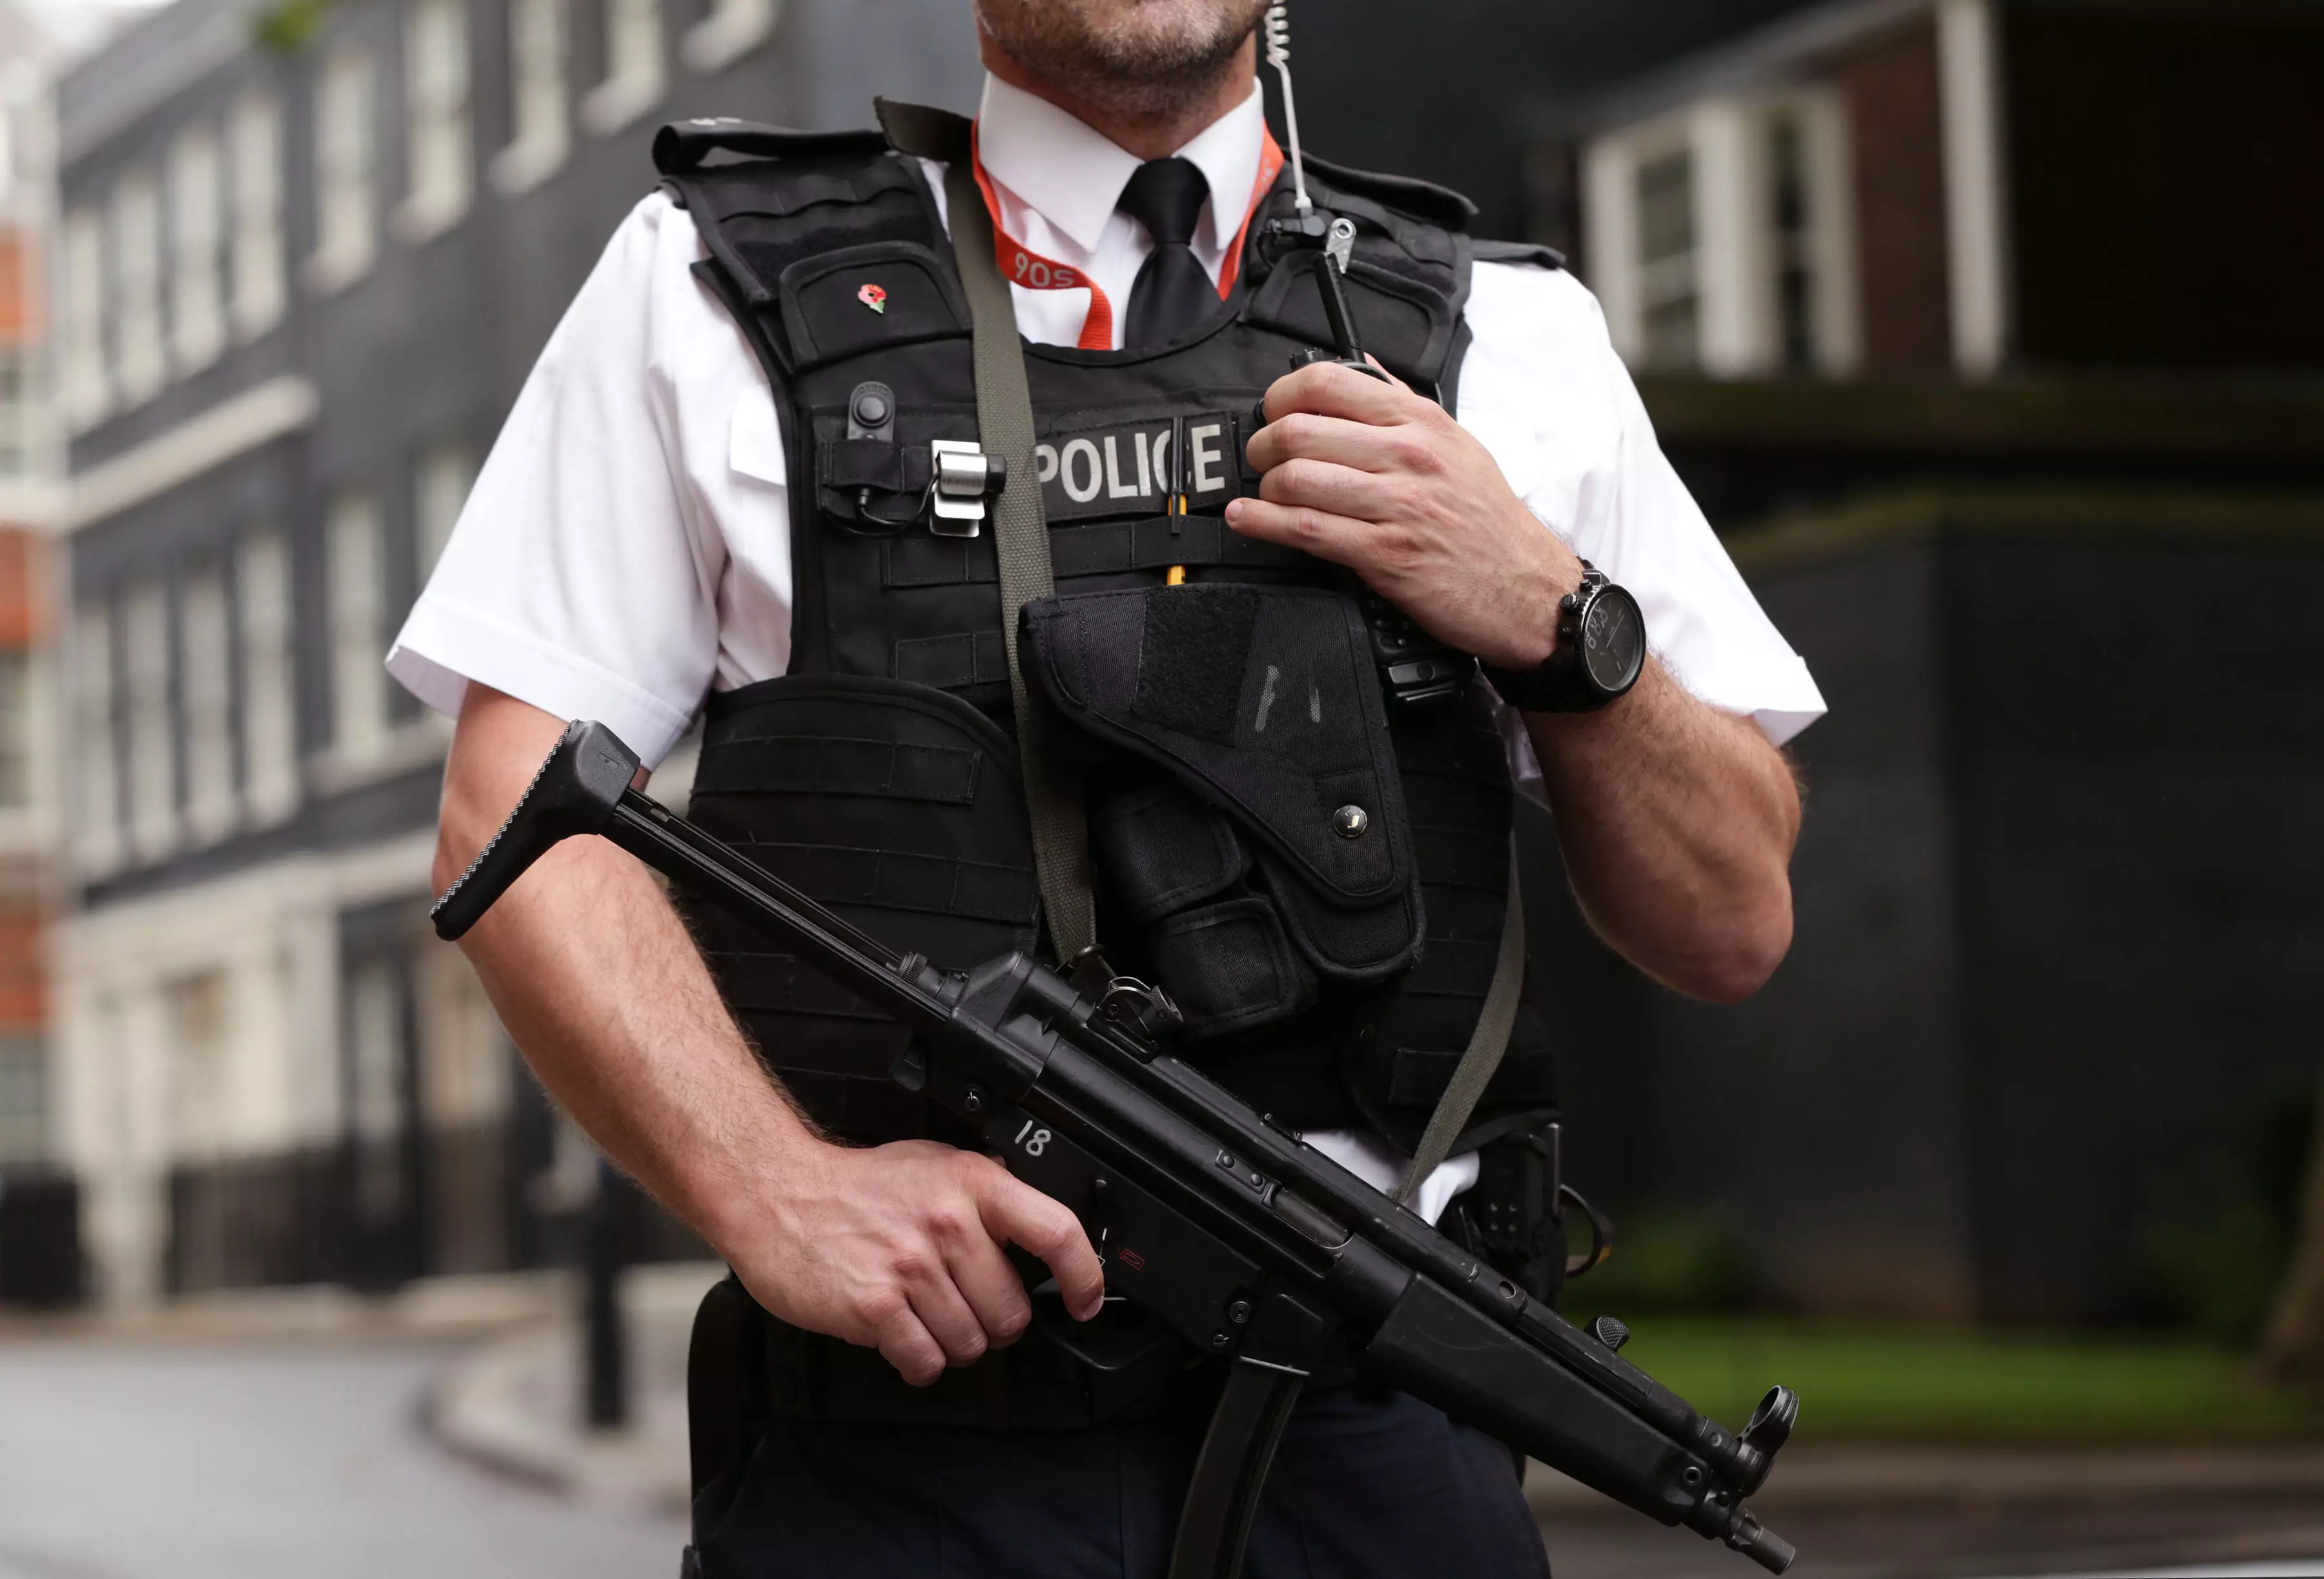 UK police officer standing guard in London